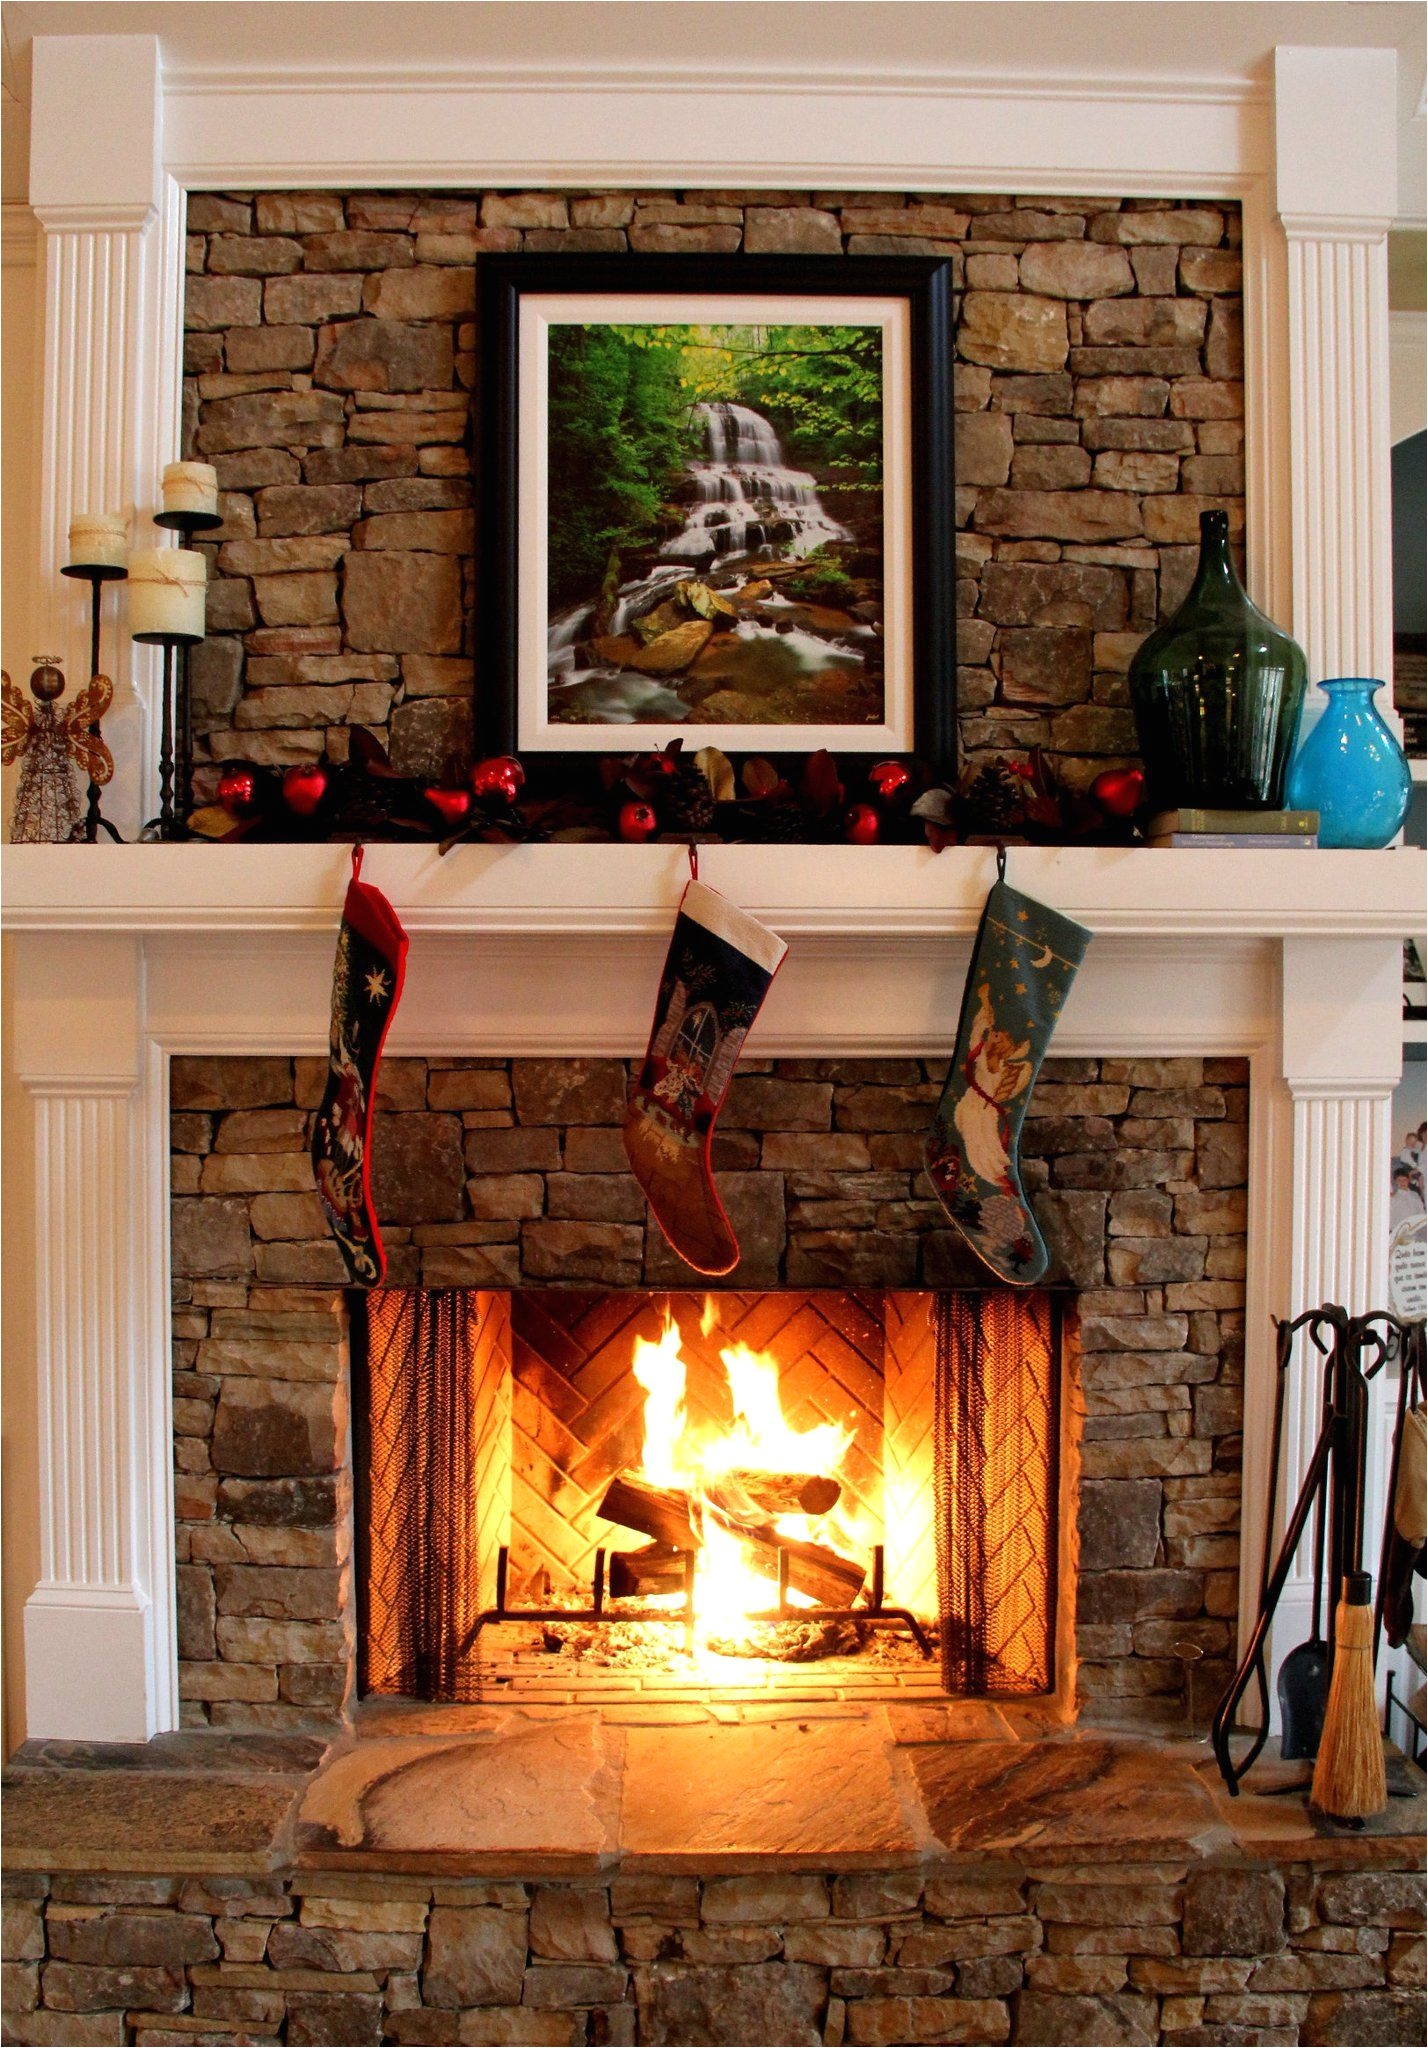 how to build a gas fireplace hearth love the wood mixed with the fireplace adn the slate hearth whats of how to build a gas fireplace hearth